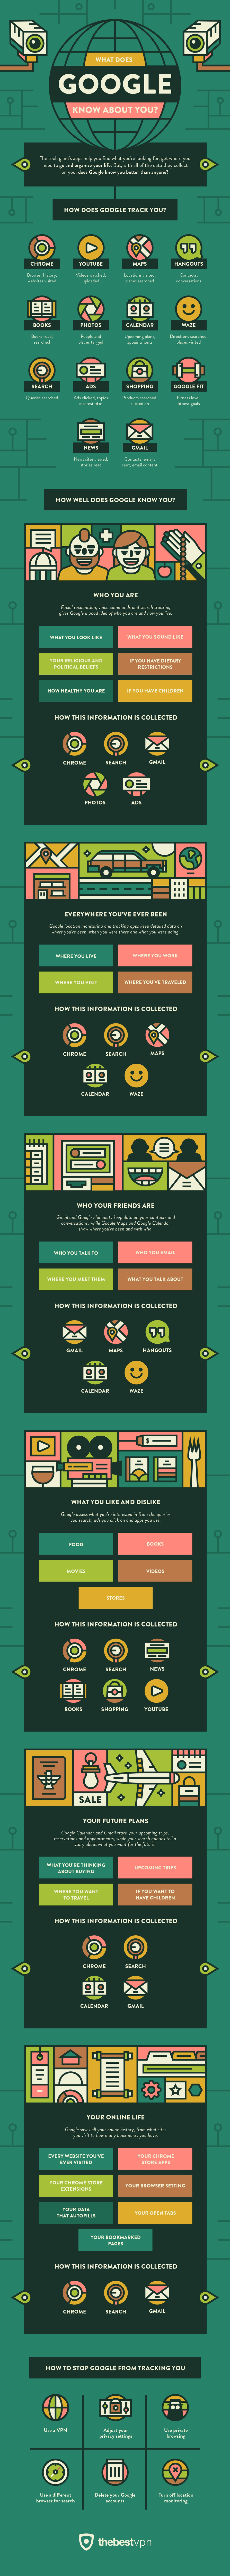 what does google know about you infographic